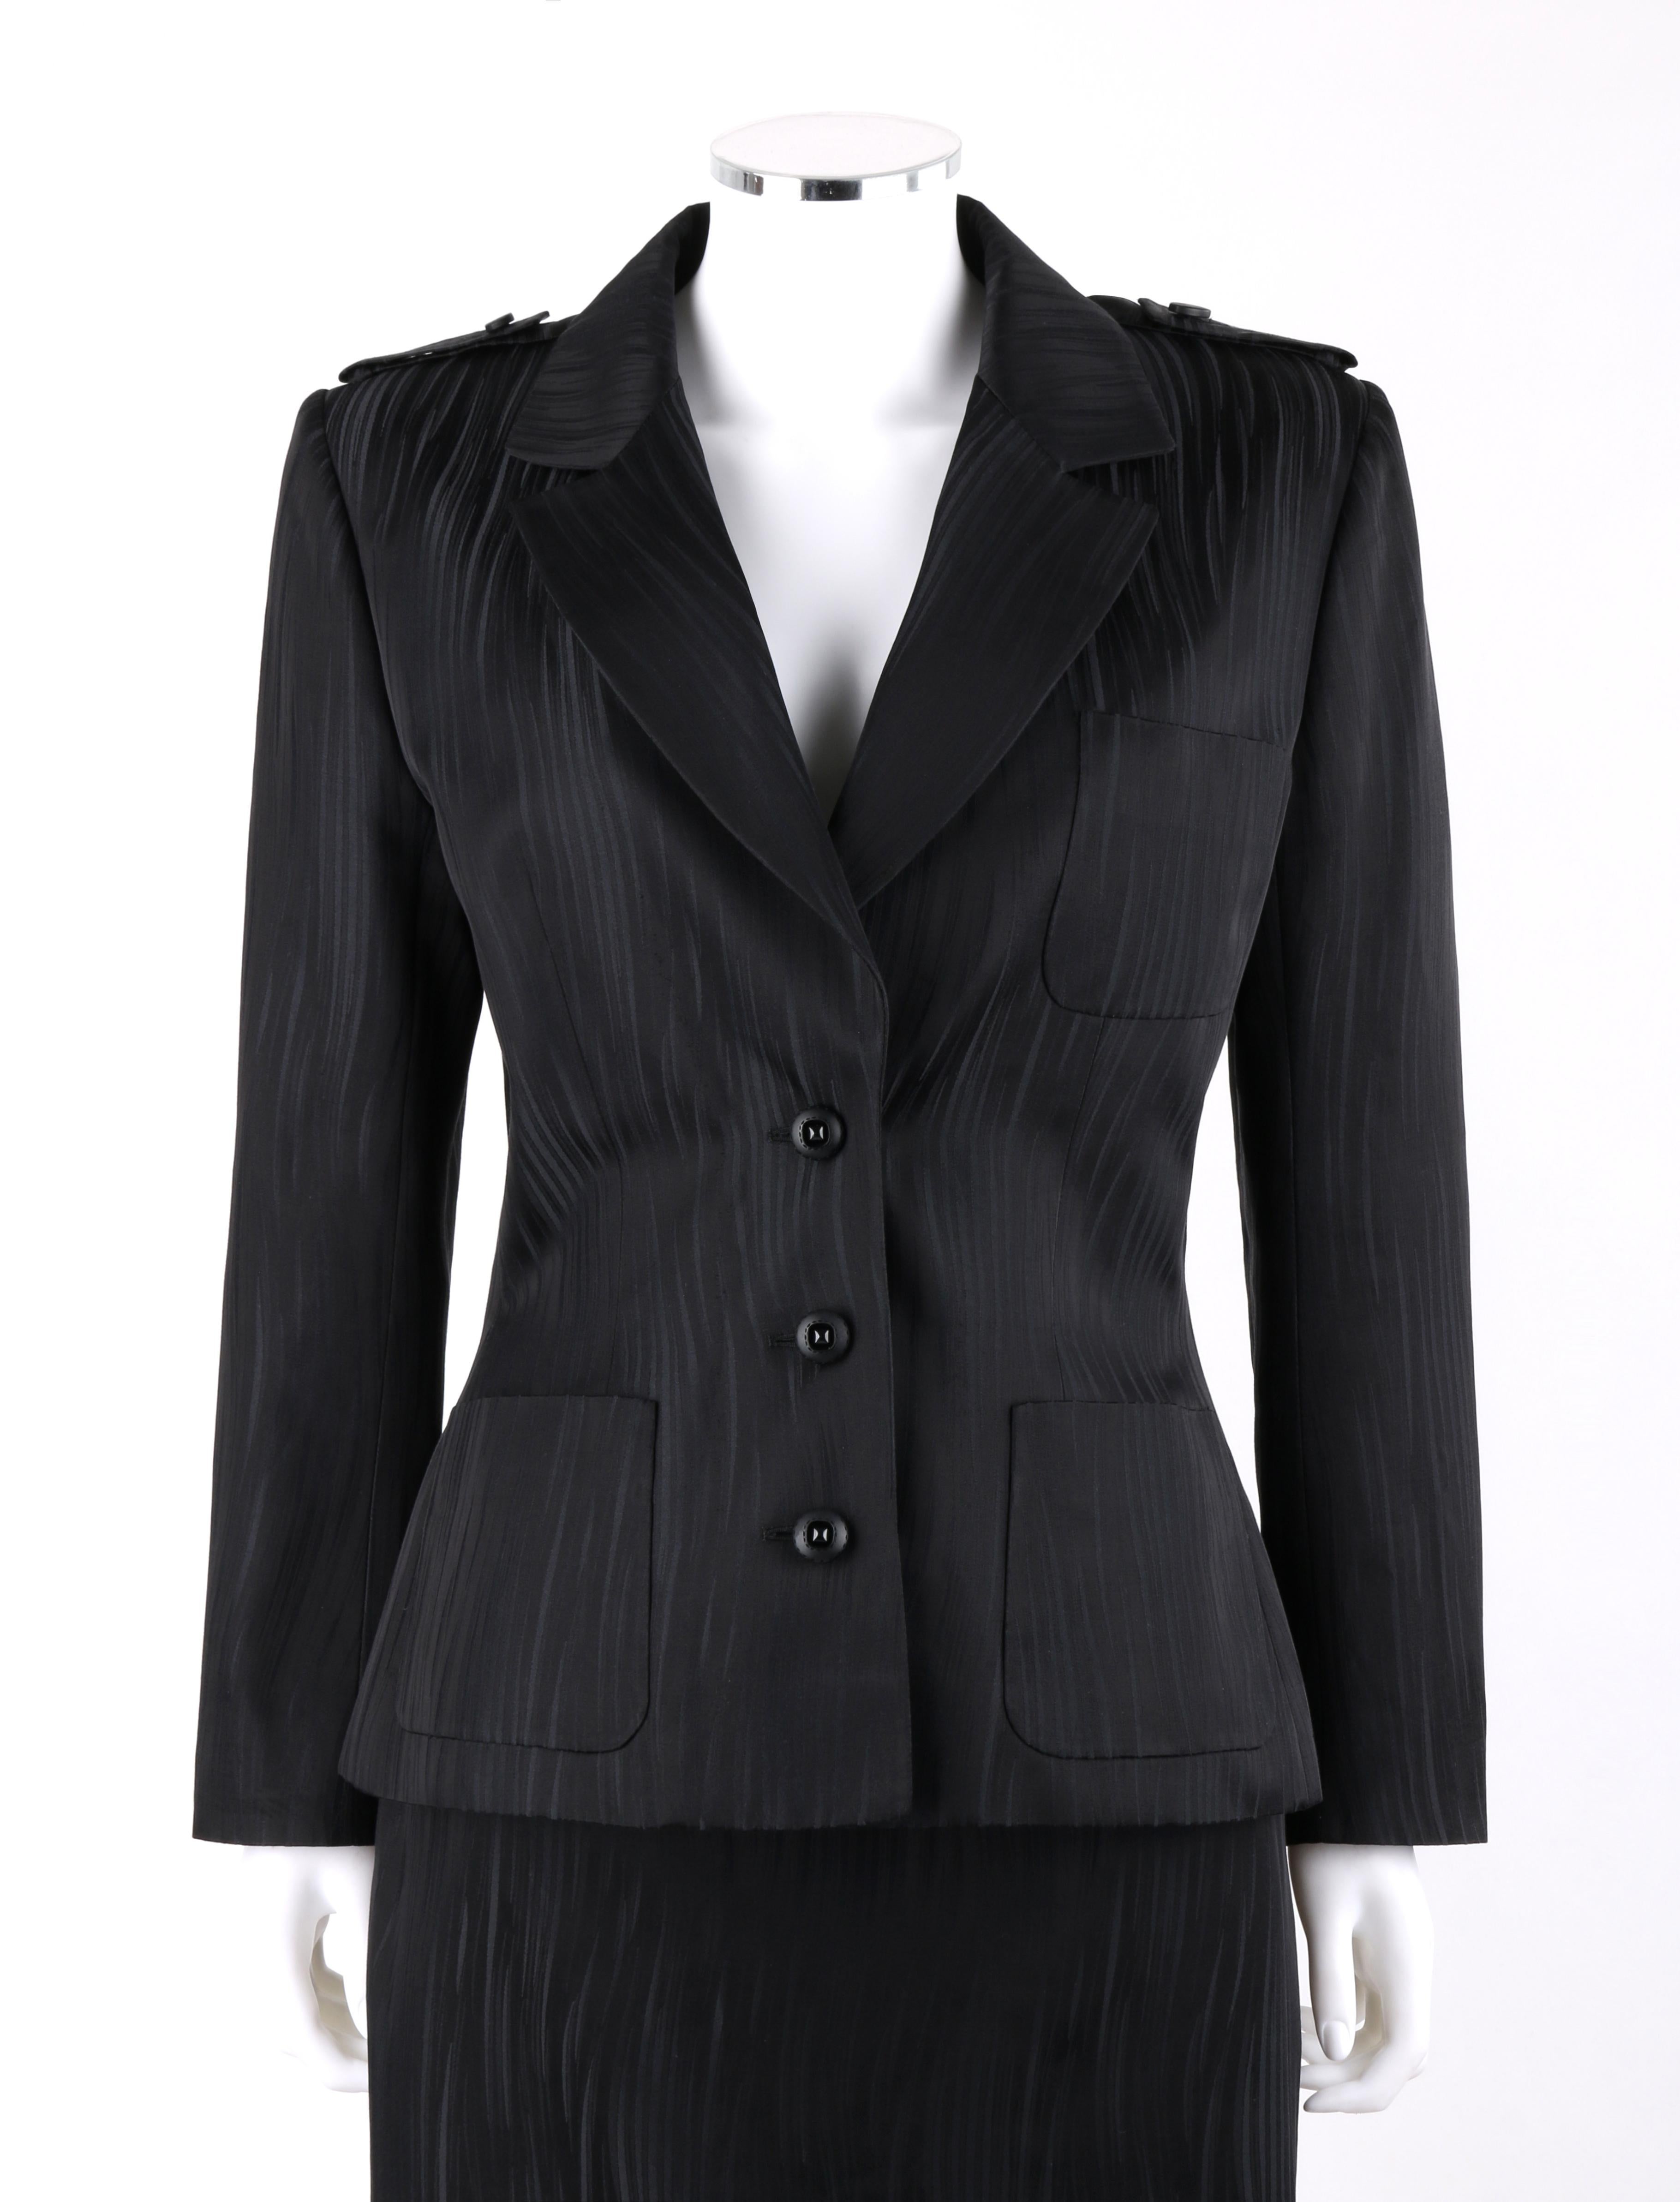 GIVENCHY Couture A/W 1999 Alexander McQueen Black Gray Stripe Blazer Skirt Suit
 
Brand / Manufacturer: Givenchy Couture
Collection: A/W 1999
Designer: Alexander McQueen
Style: Blazer jacket; fitted pencil skirt
Color(s): Black and gray
Lined: